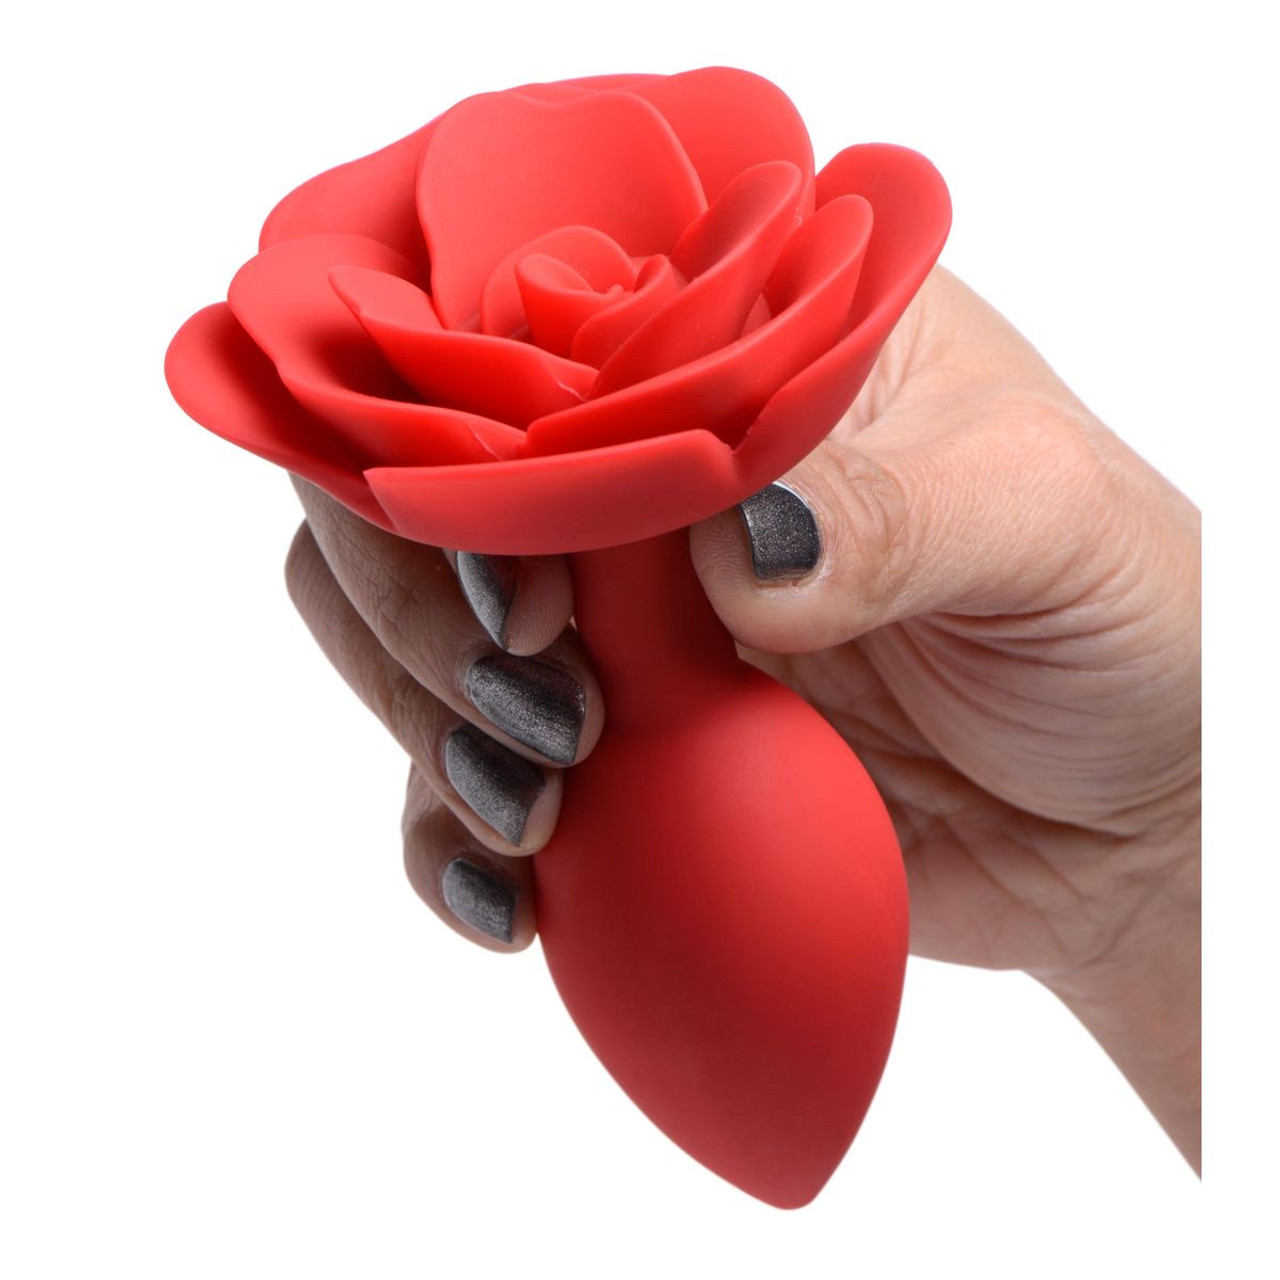 Master Series Booty Bloom Silicone Rose Anal Plug product image